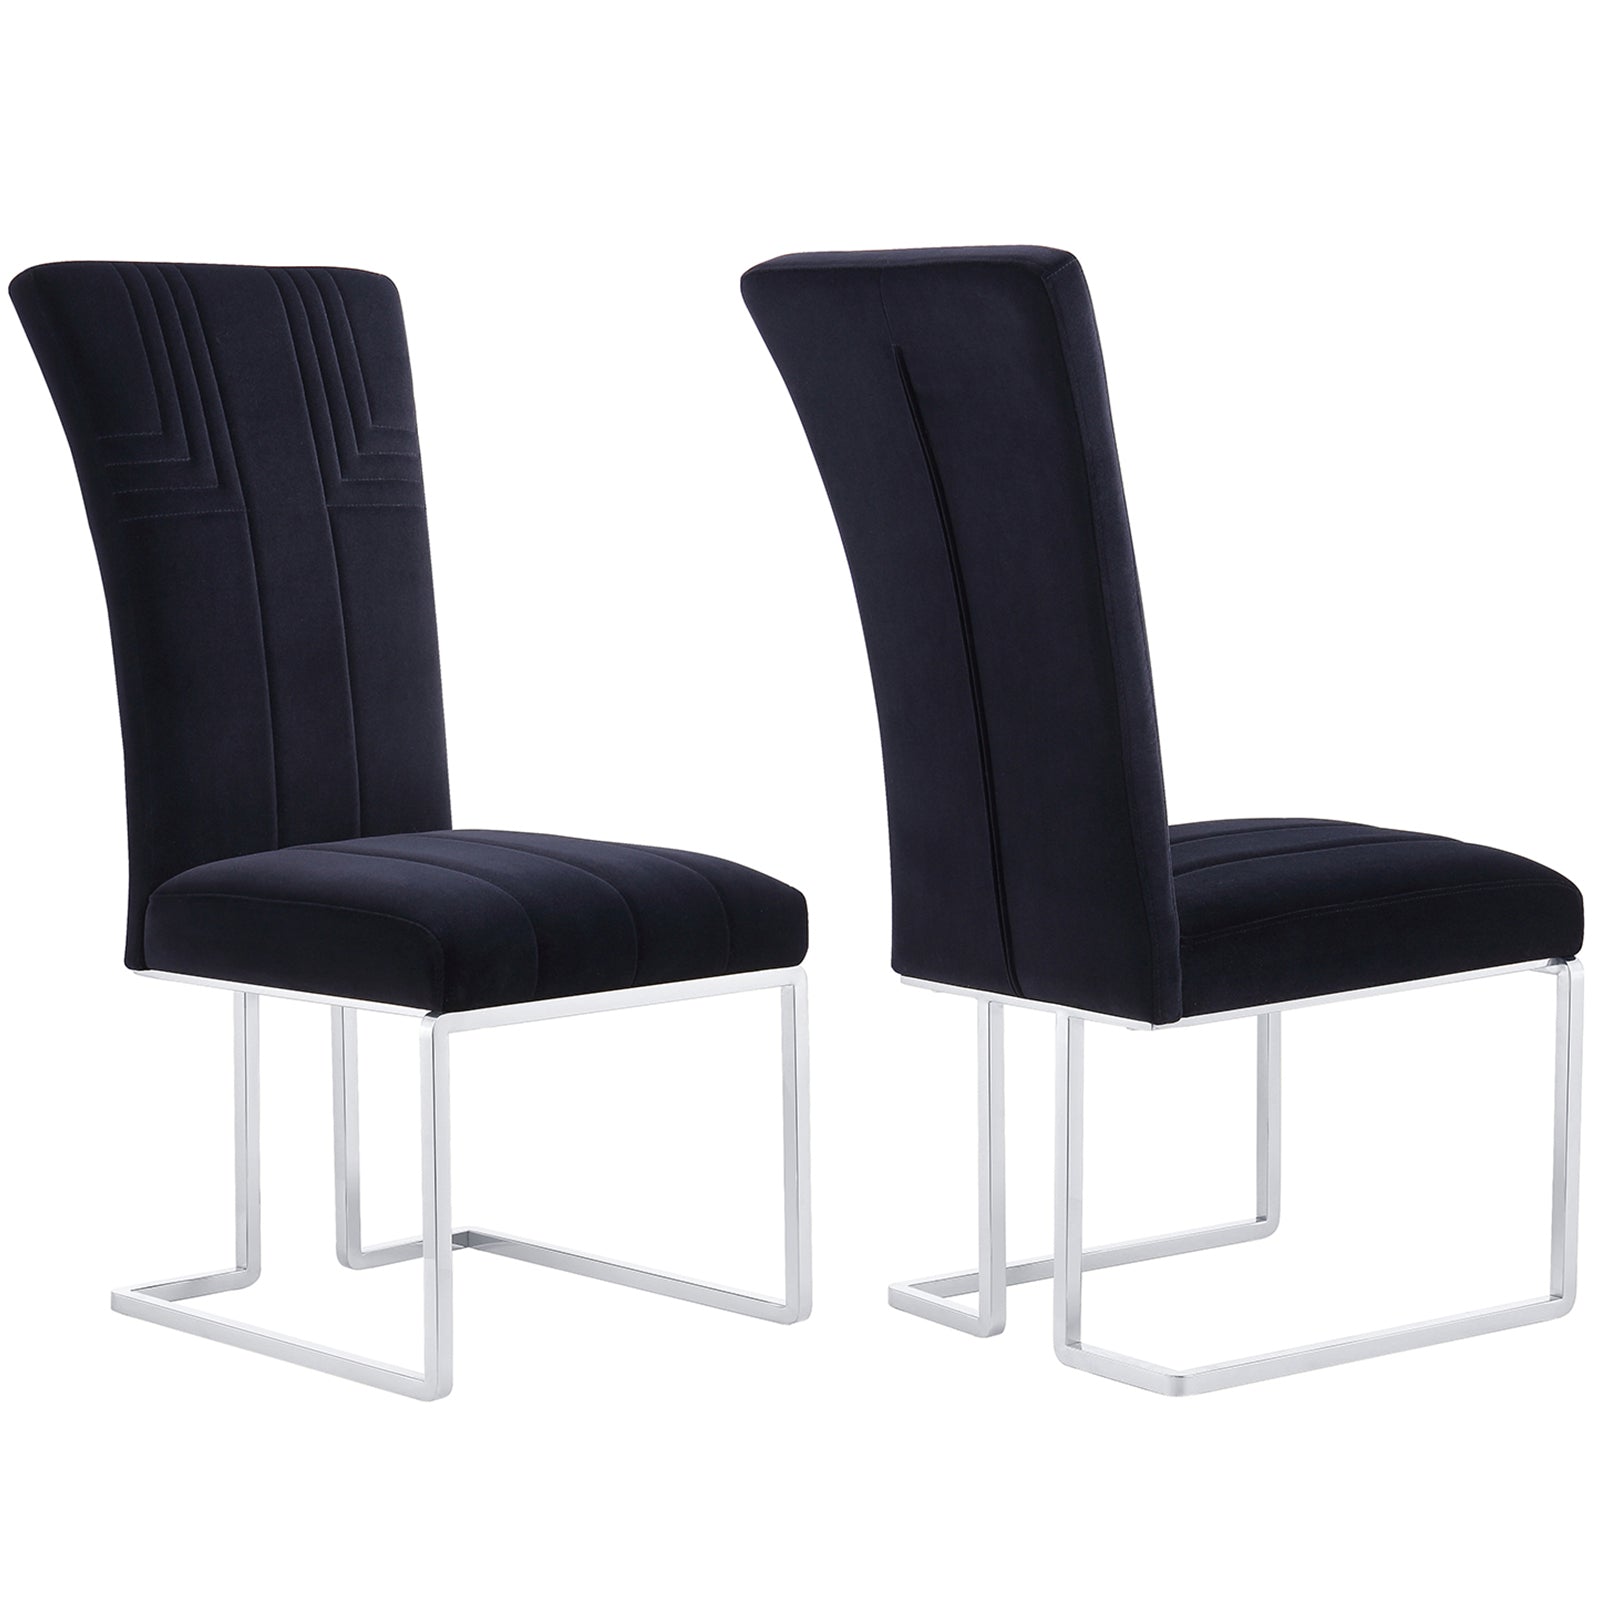 Enhance Your Dining Experience with AUZ Sled Base Dining Chairs in Black Velvet